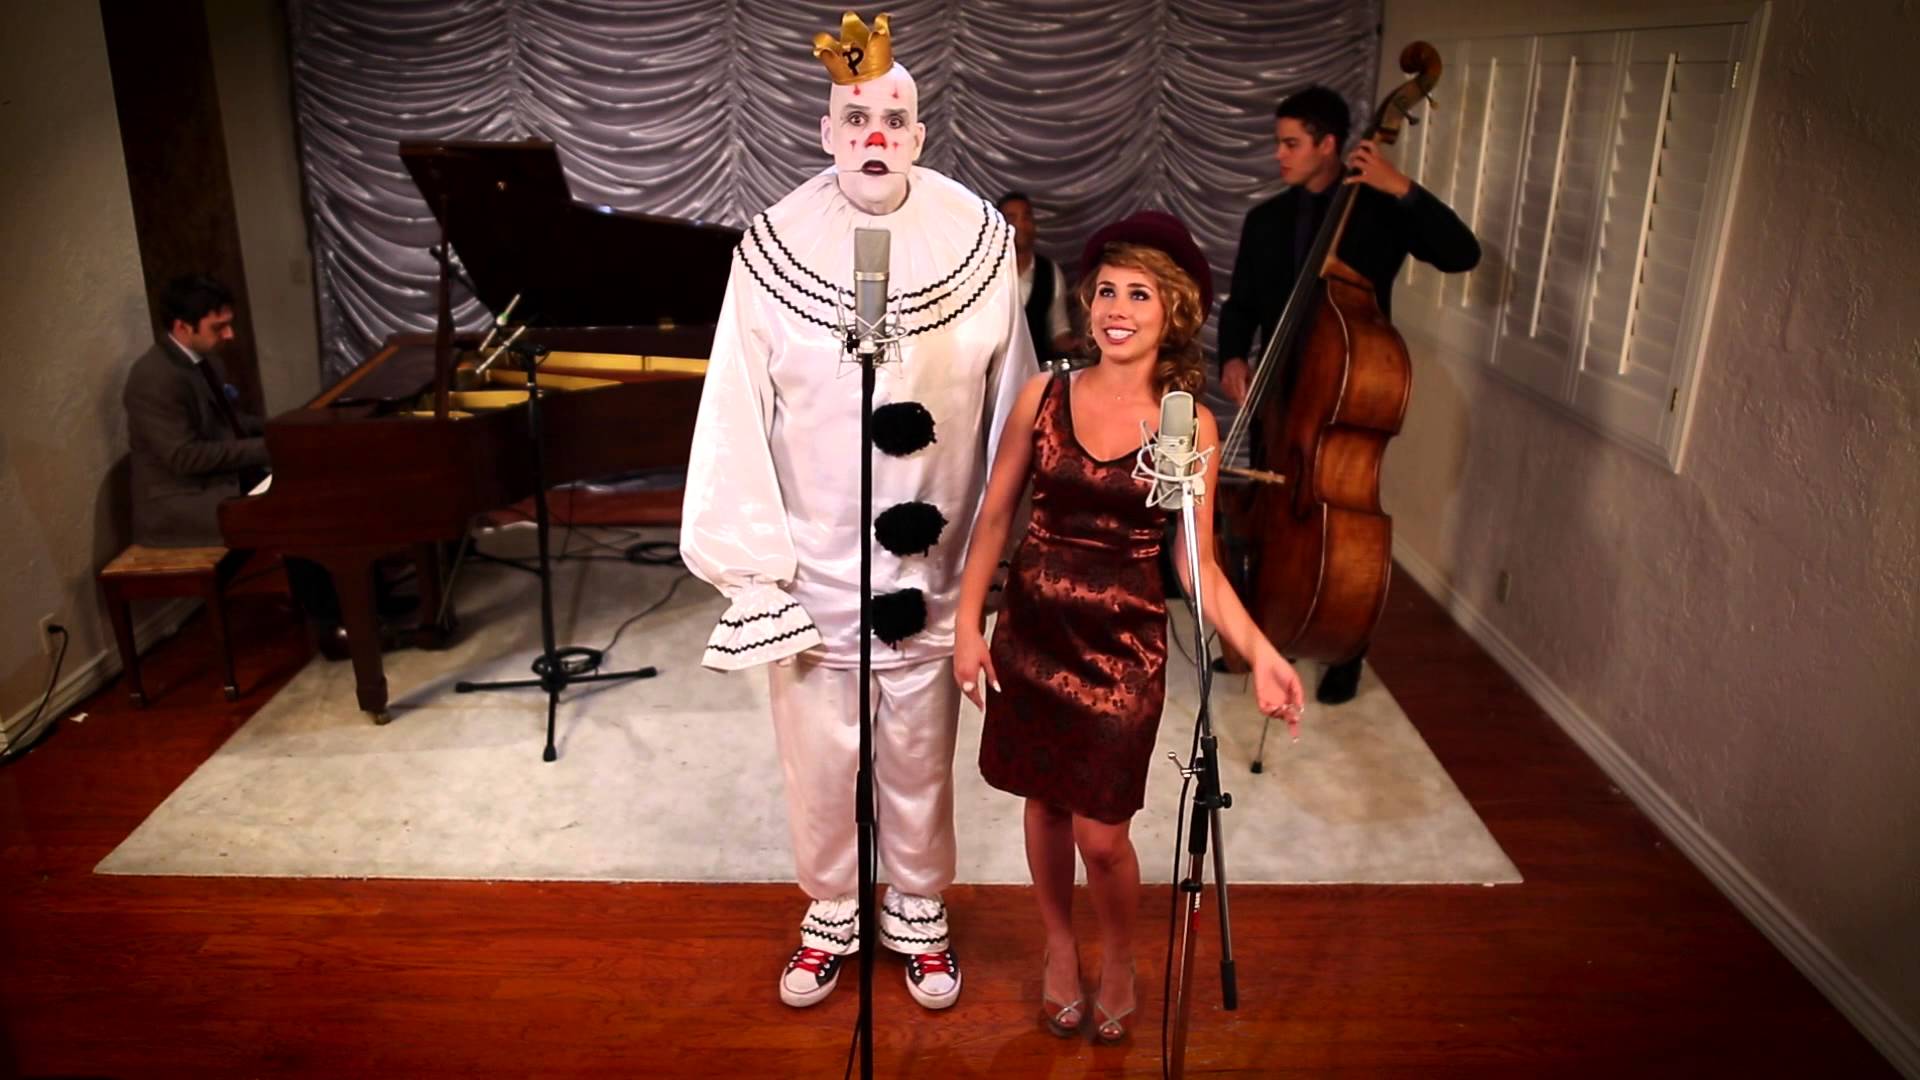 Mad World - Vintage Vaudeville - Style Cover ft. Puddles Pity Party ...